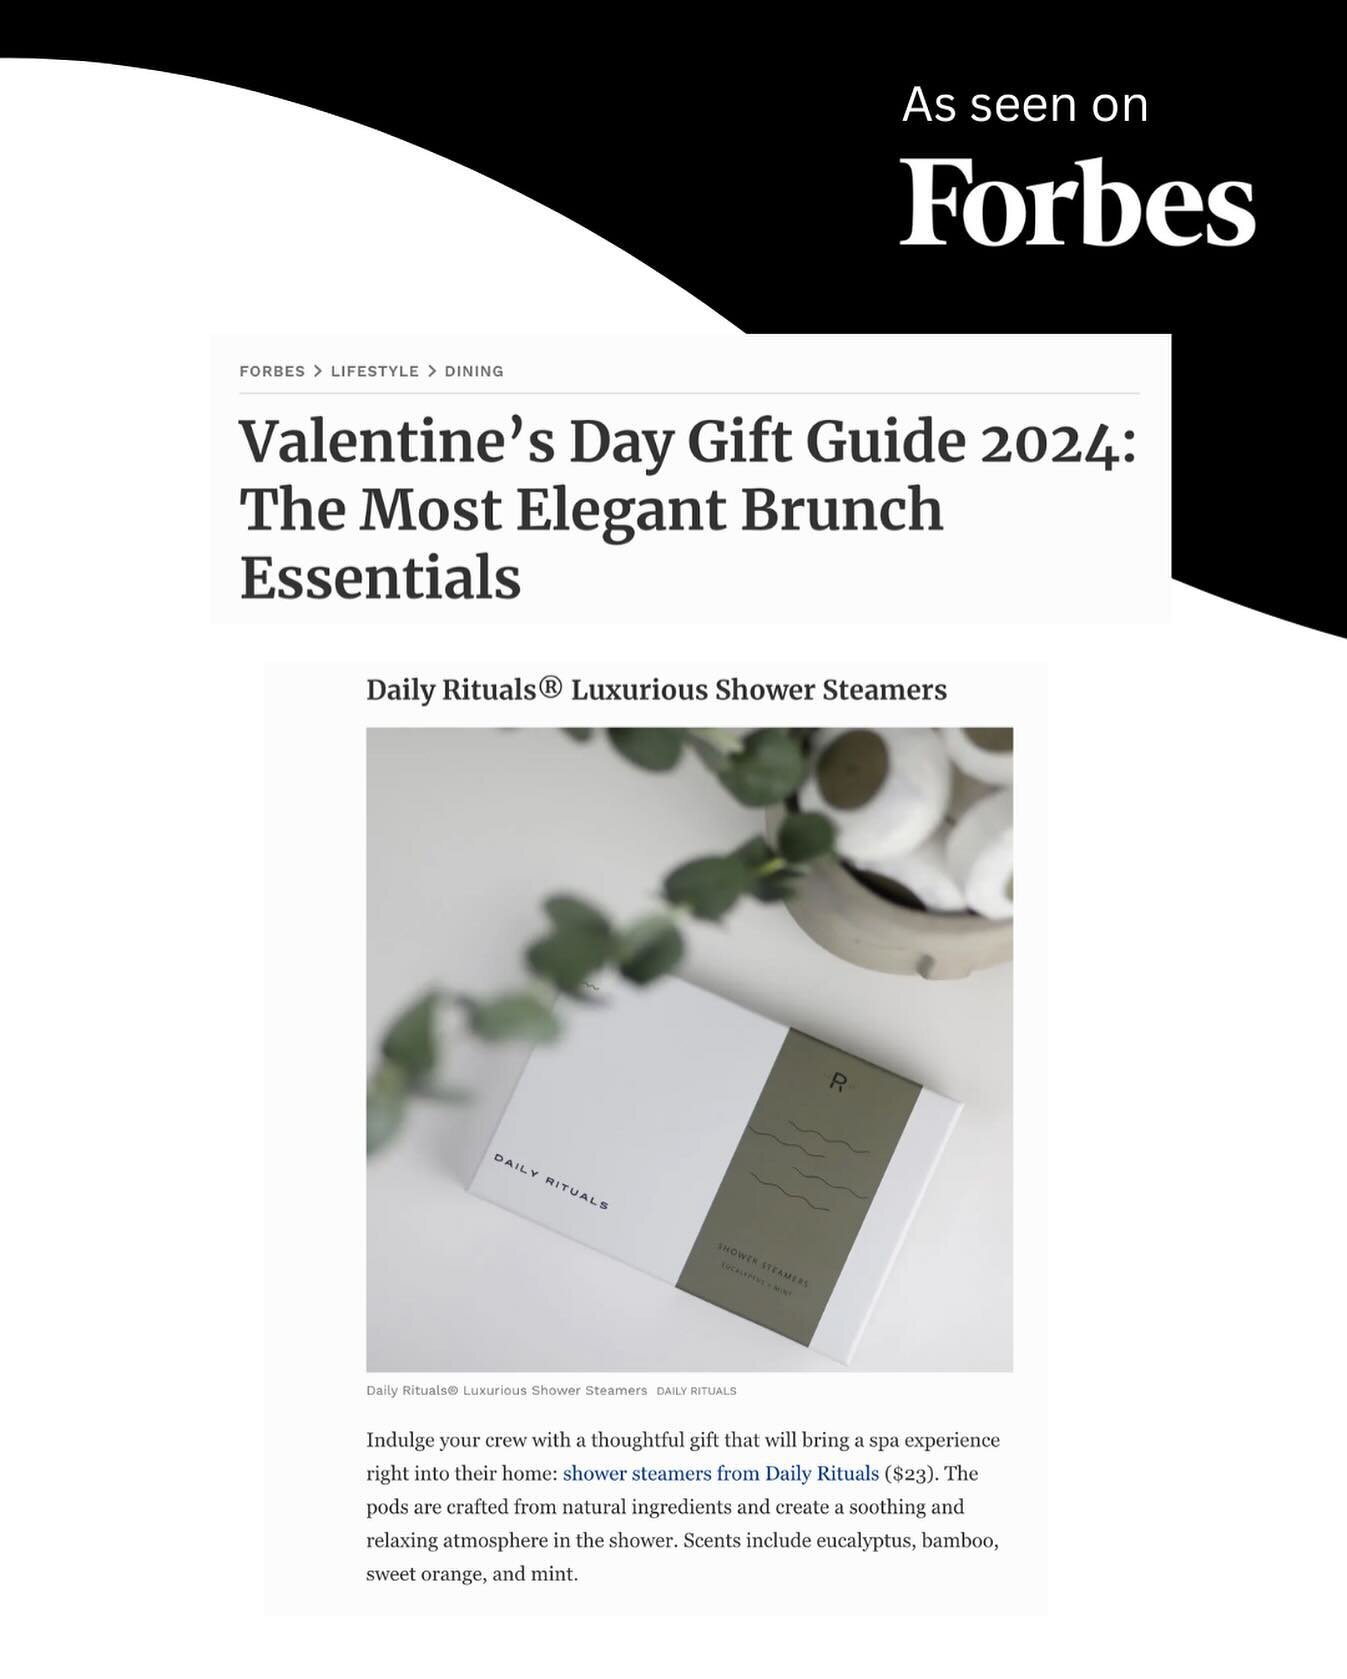 Though a bit delayed, we&rsquo;re thrilled to share that Forbes included us in their Valentine&rsquo;s Day selections. Thank you, @forbes